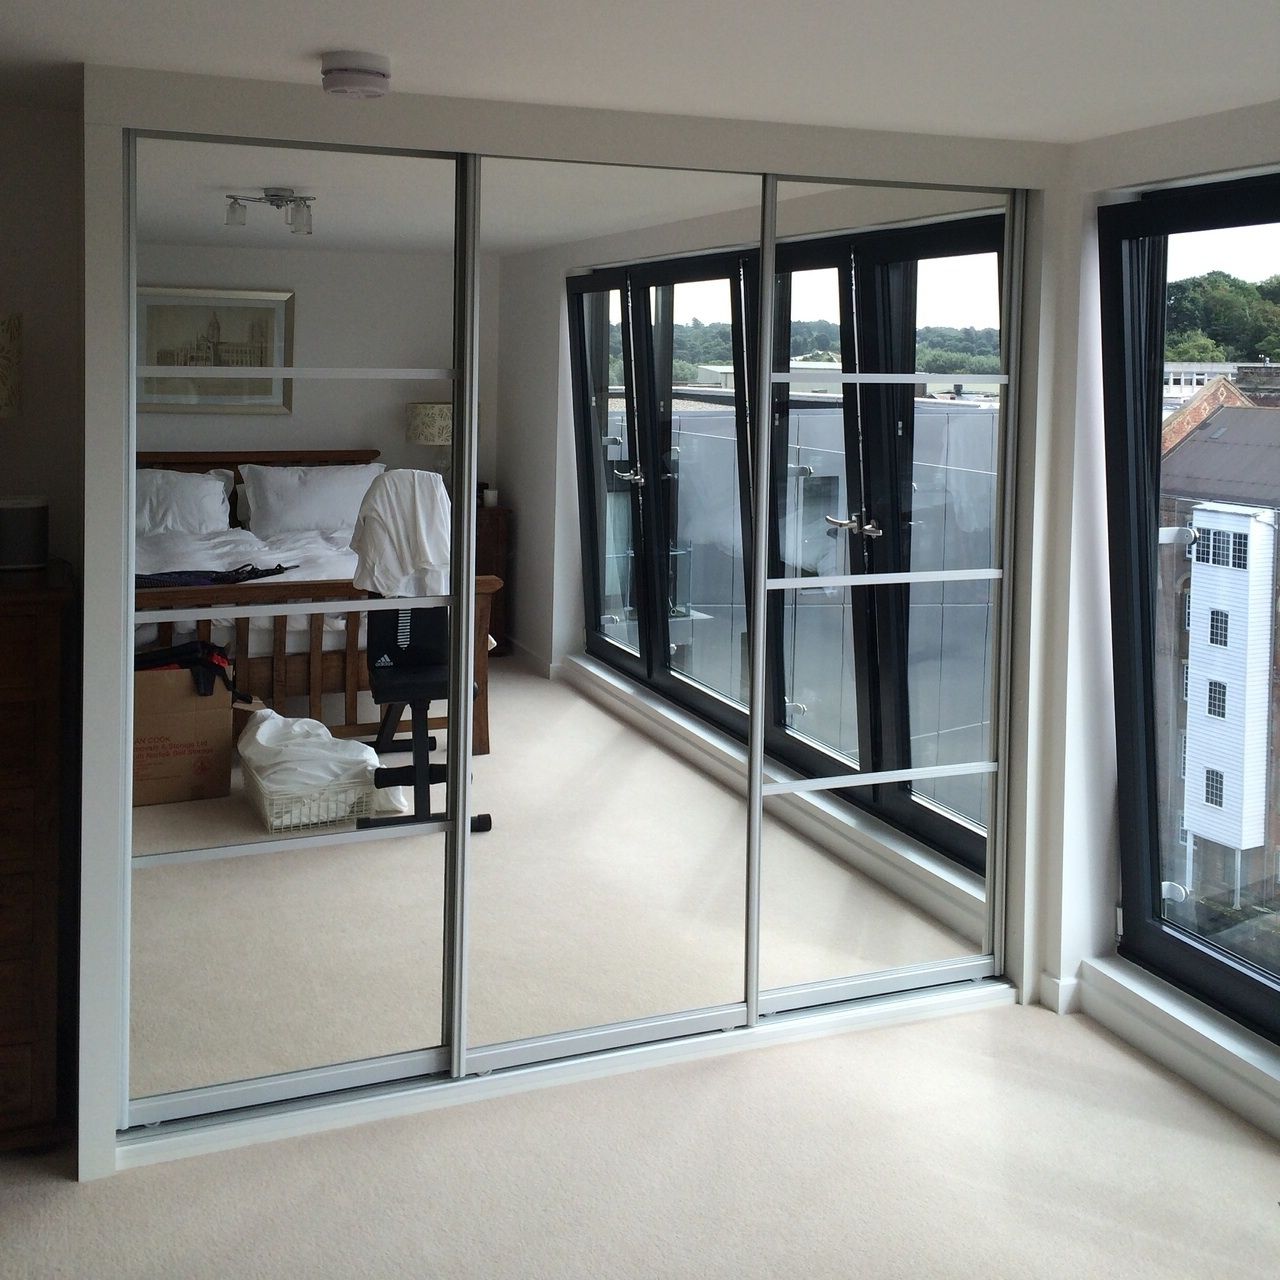 Fashionable Mirrored Wardrobes Regarding Mirrored Wardrobes: Bring Light And Space To Your Bedroom (View 4 of 15)